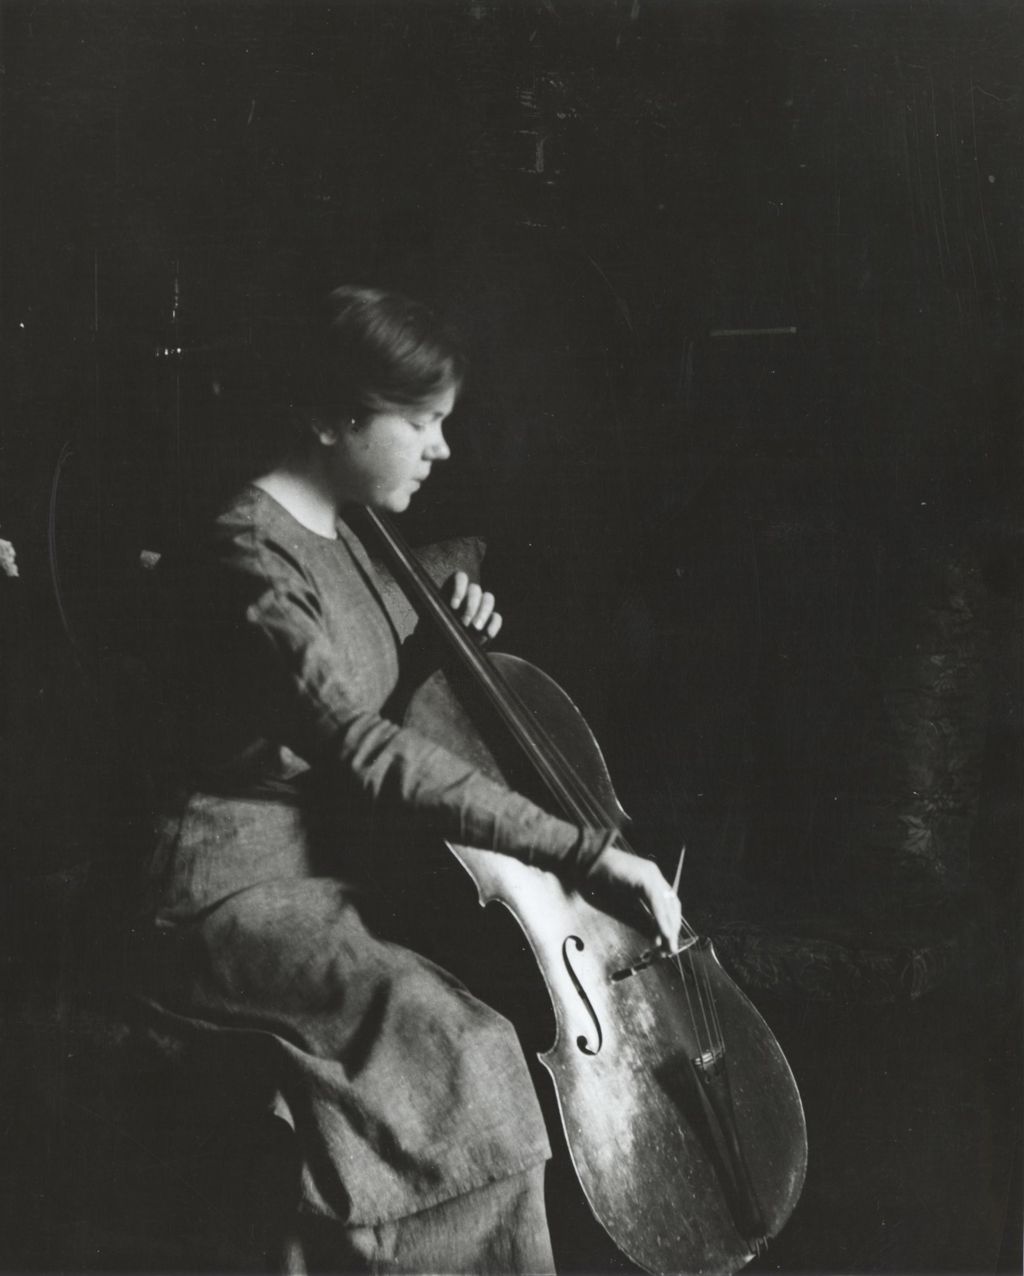 Miniature of Hull-House resident and cellist Vera Poppe playing the cello